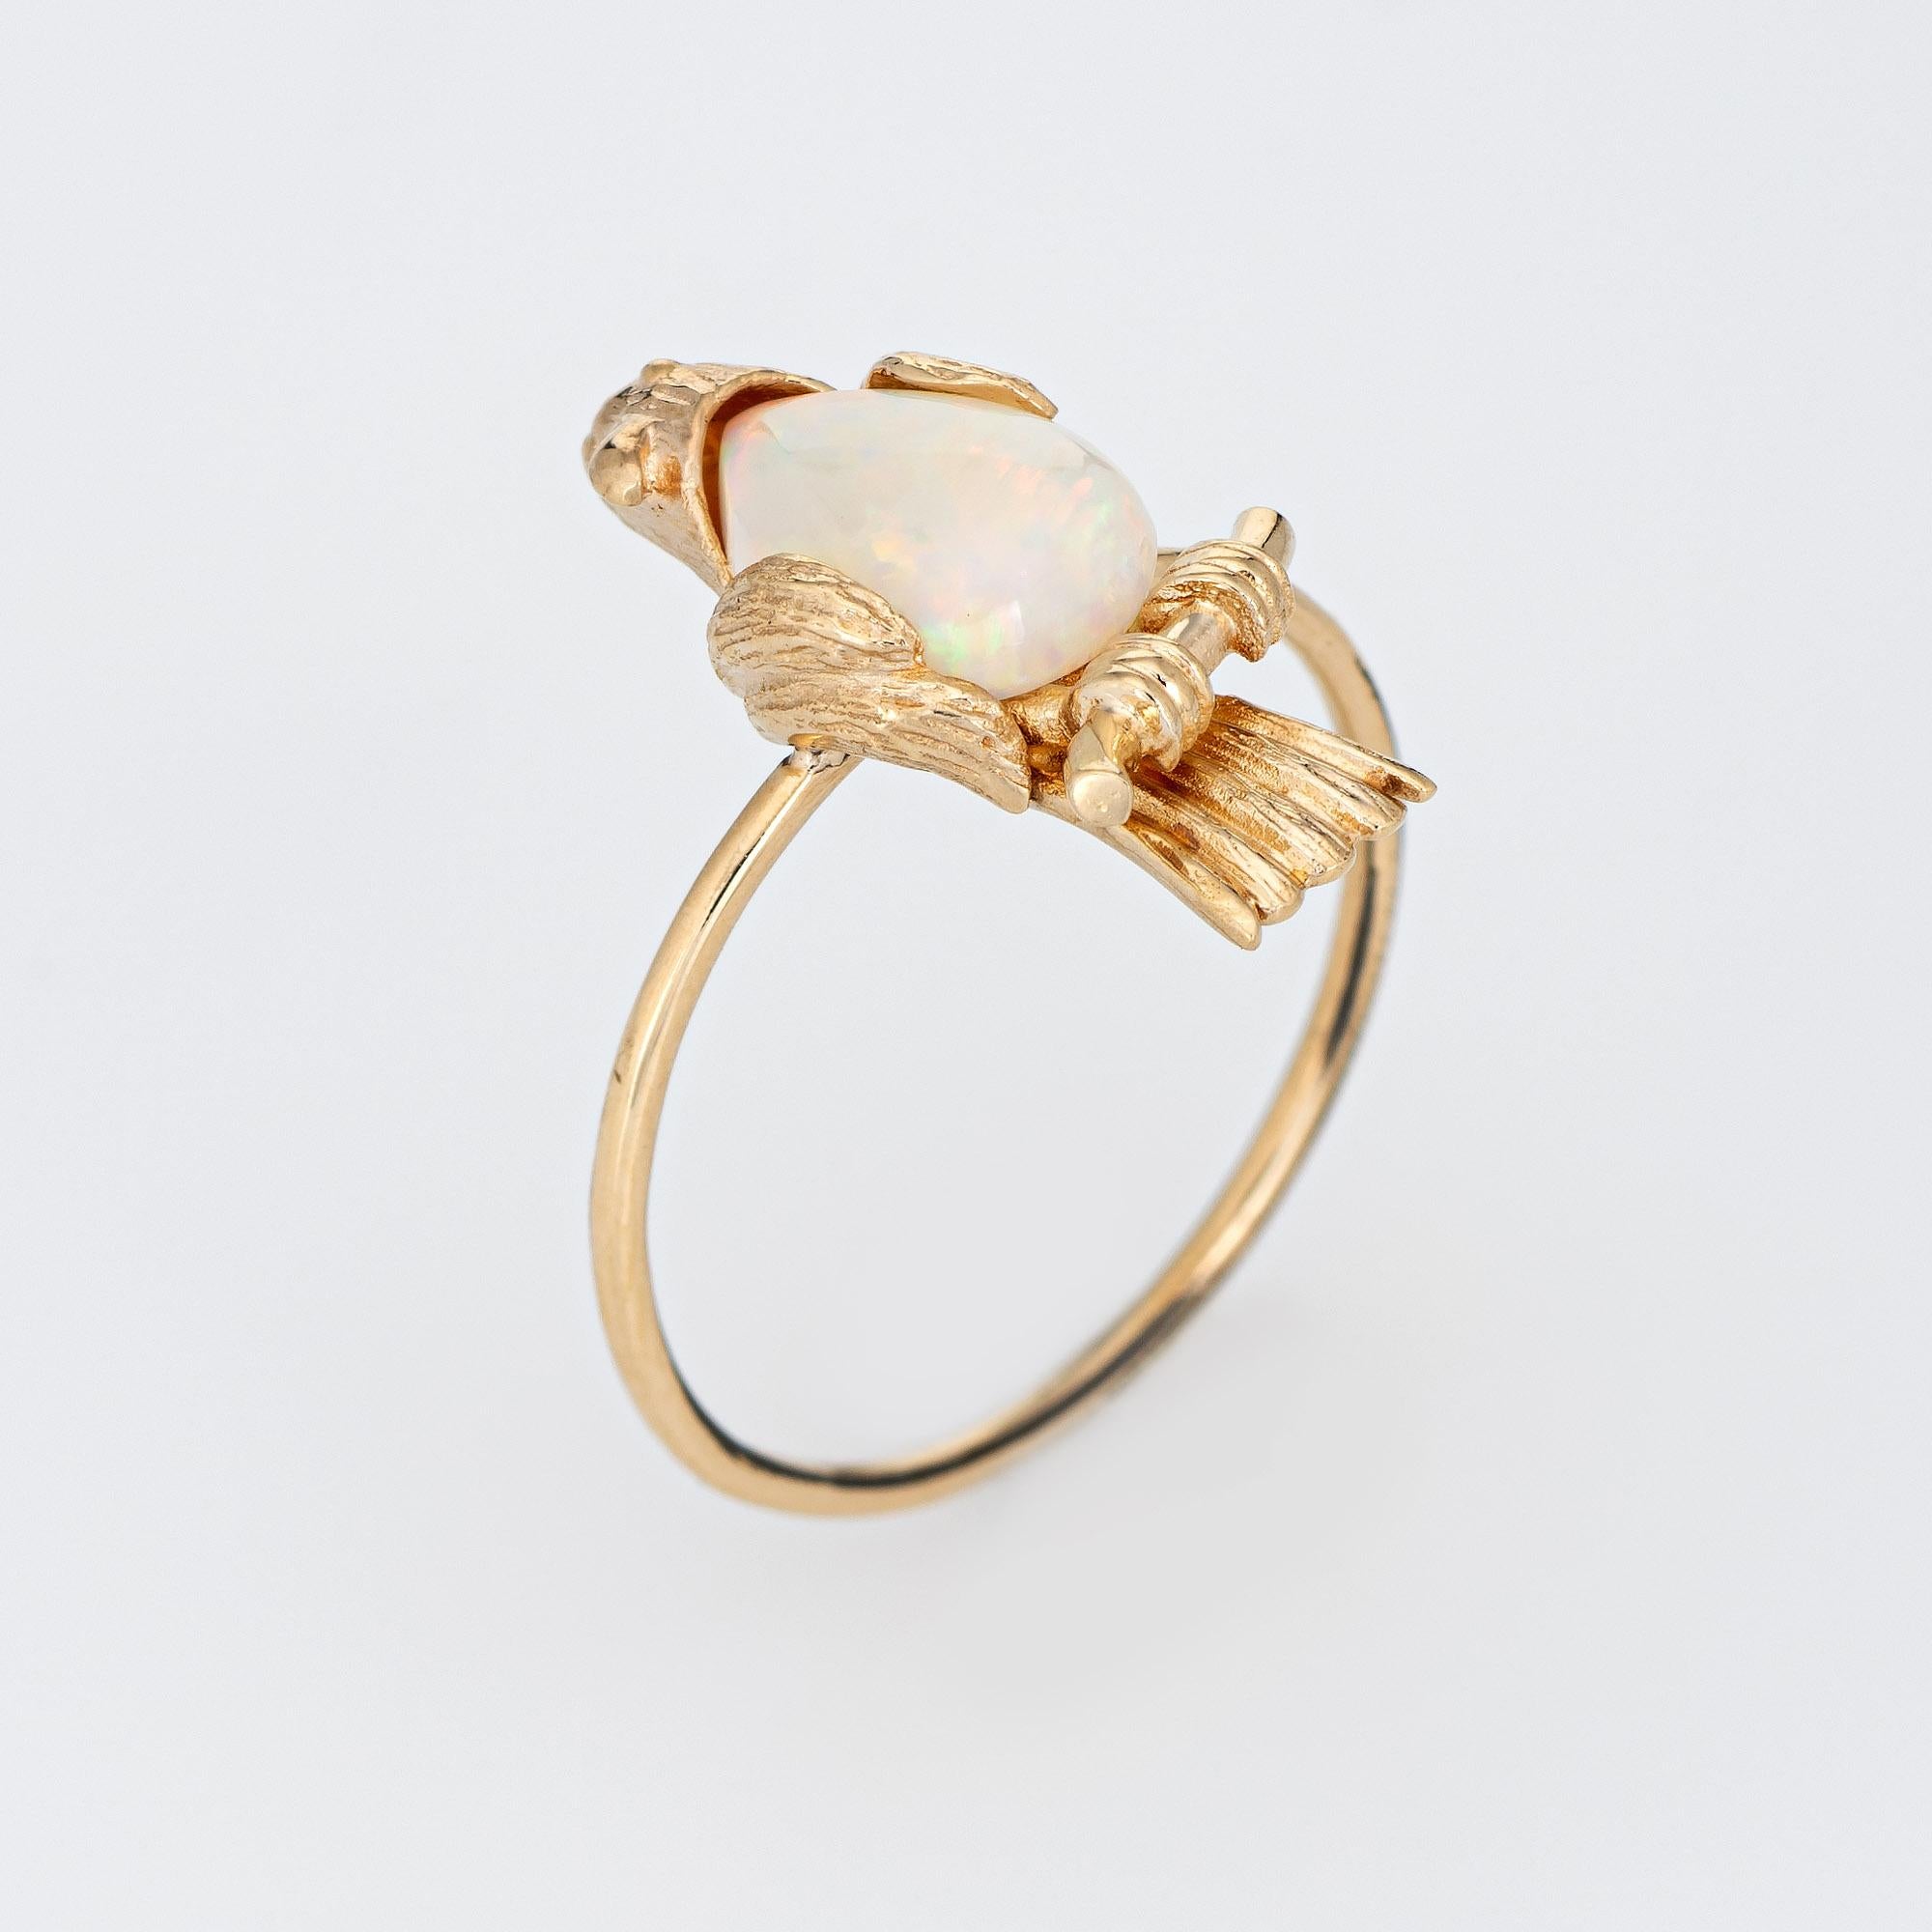 Originally a vintage stick pin (circa 1950s to 1960s), the bird is crafted in 14 karat yellow gold.

The ring is mounted with the original stick pin. Our jeweler rounded the stick pin into a slim band for the finger. The beautifully detailed bird